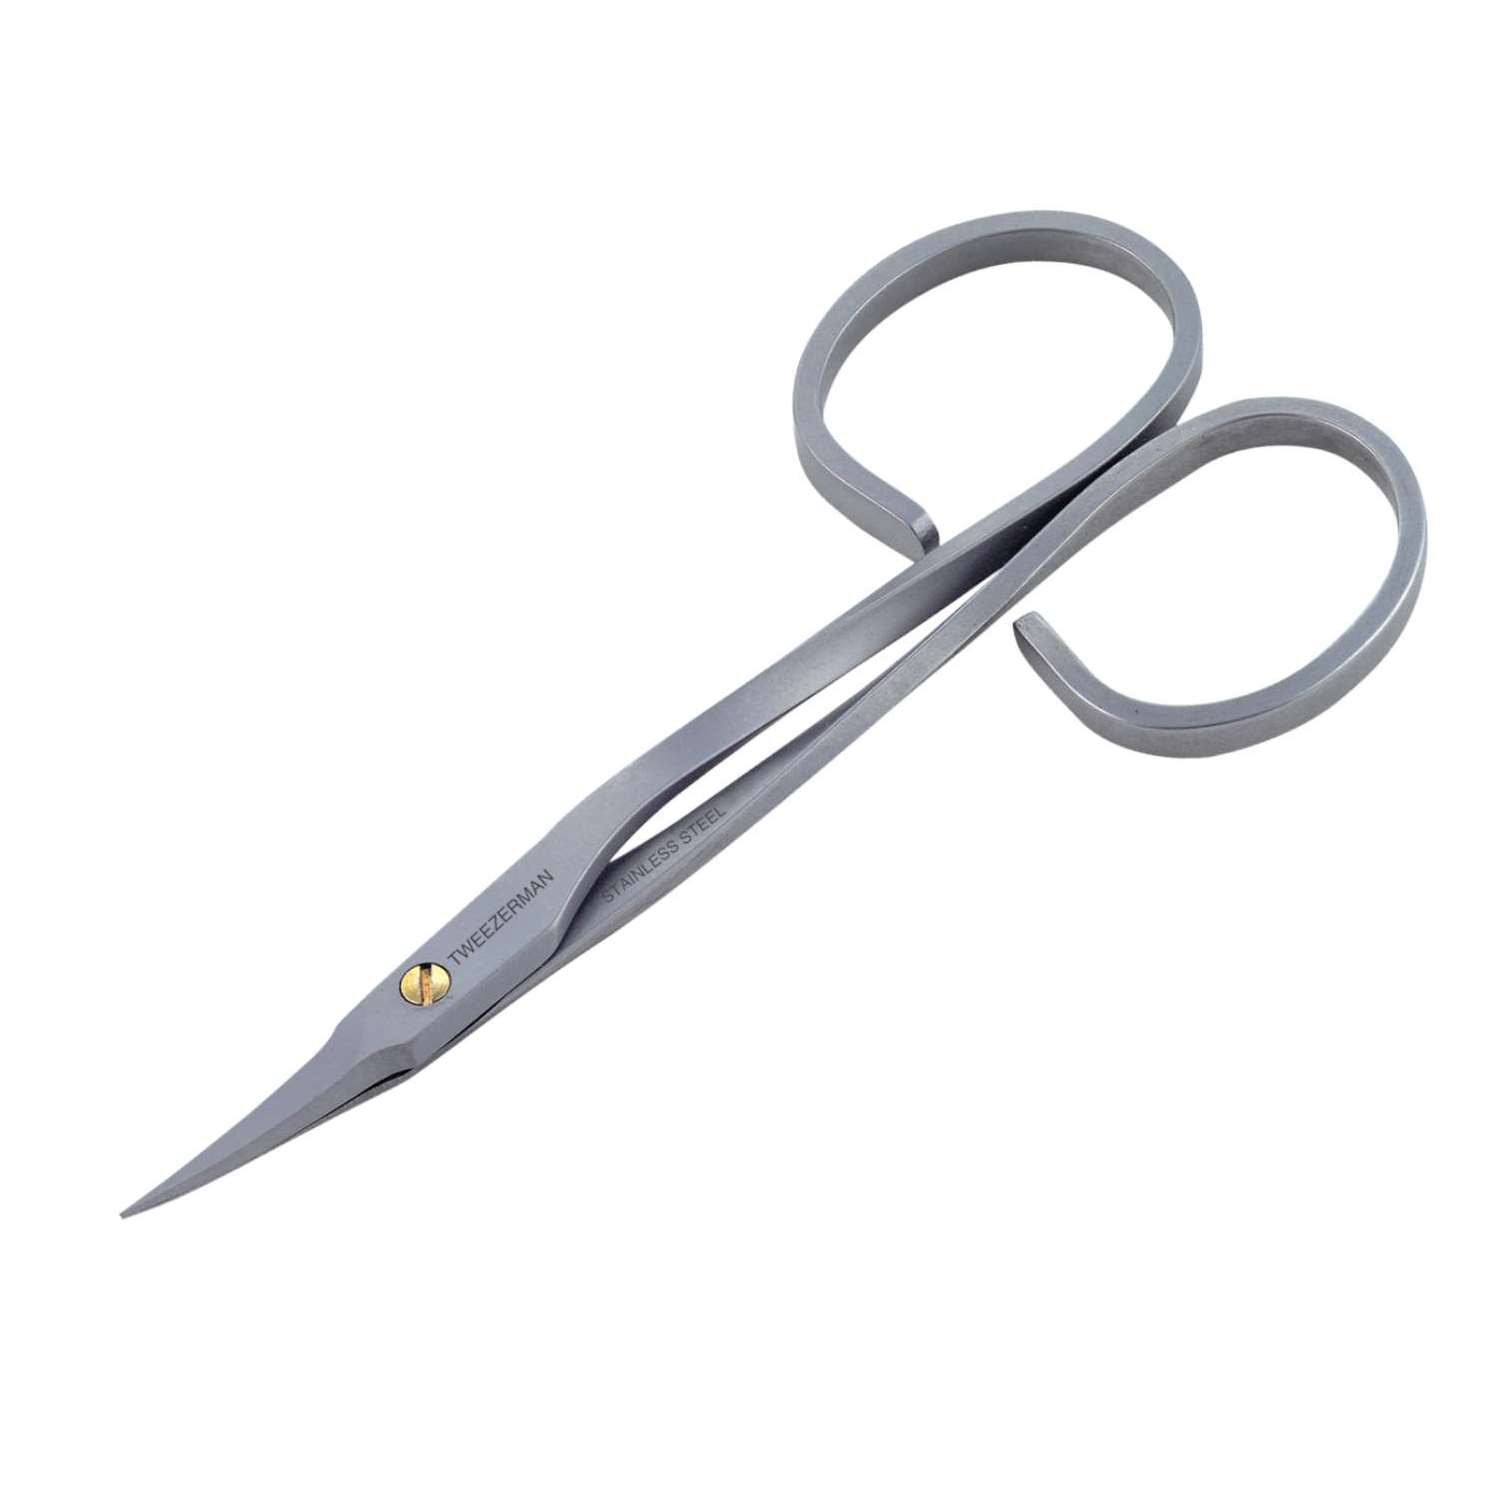  Stainless Steel Cuticle Scissors